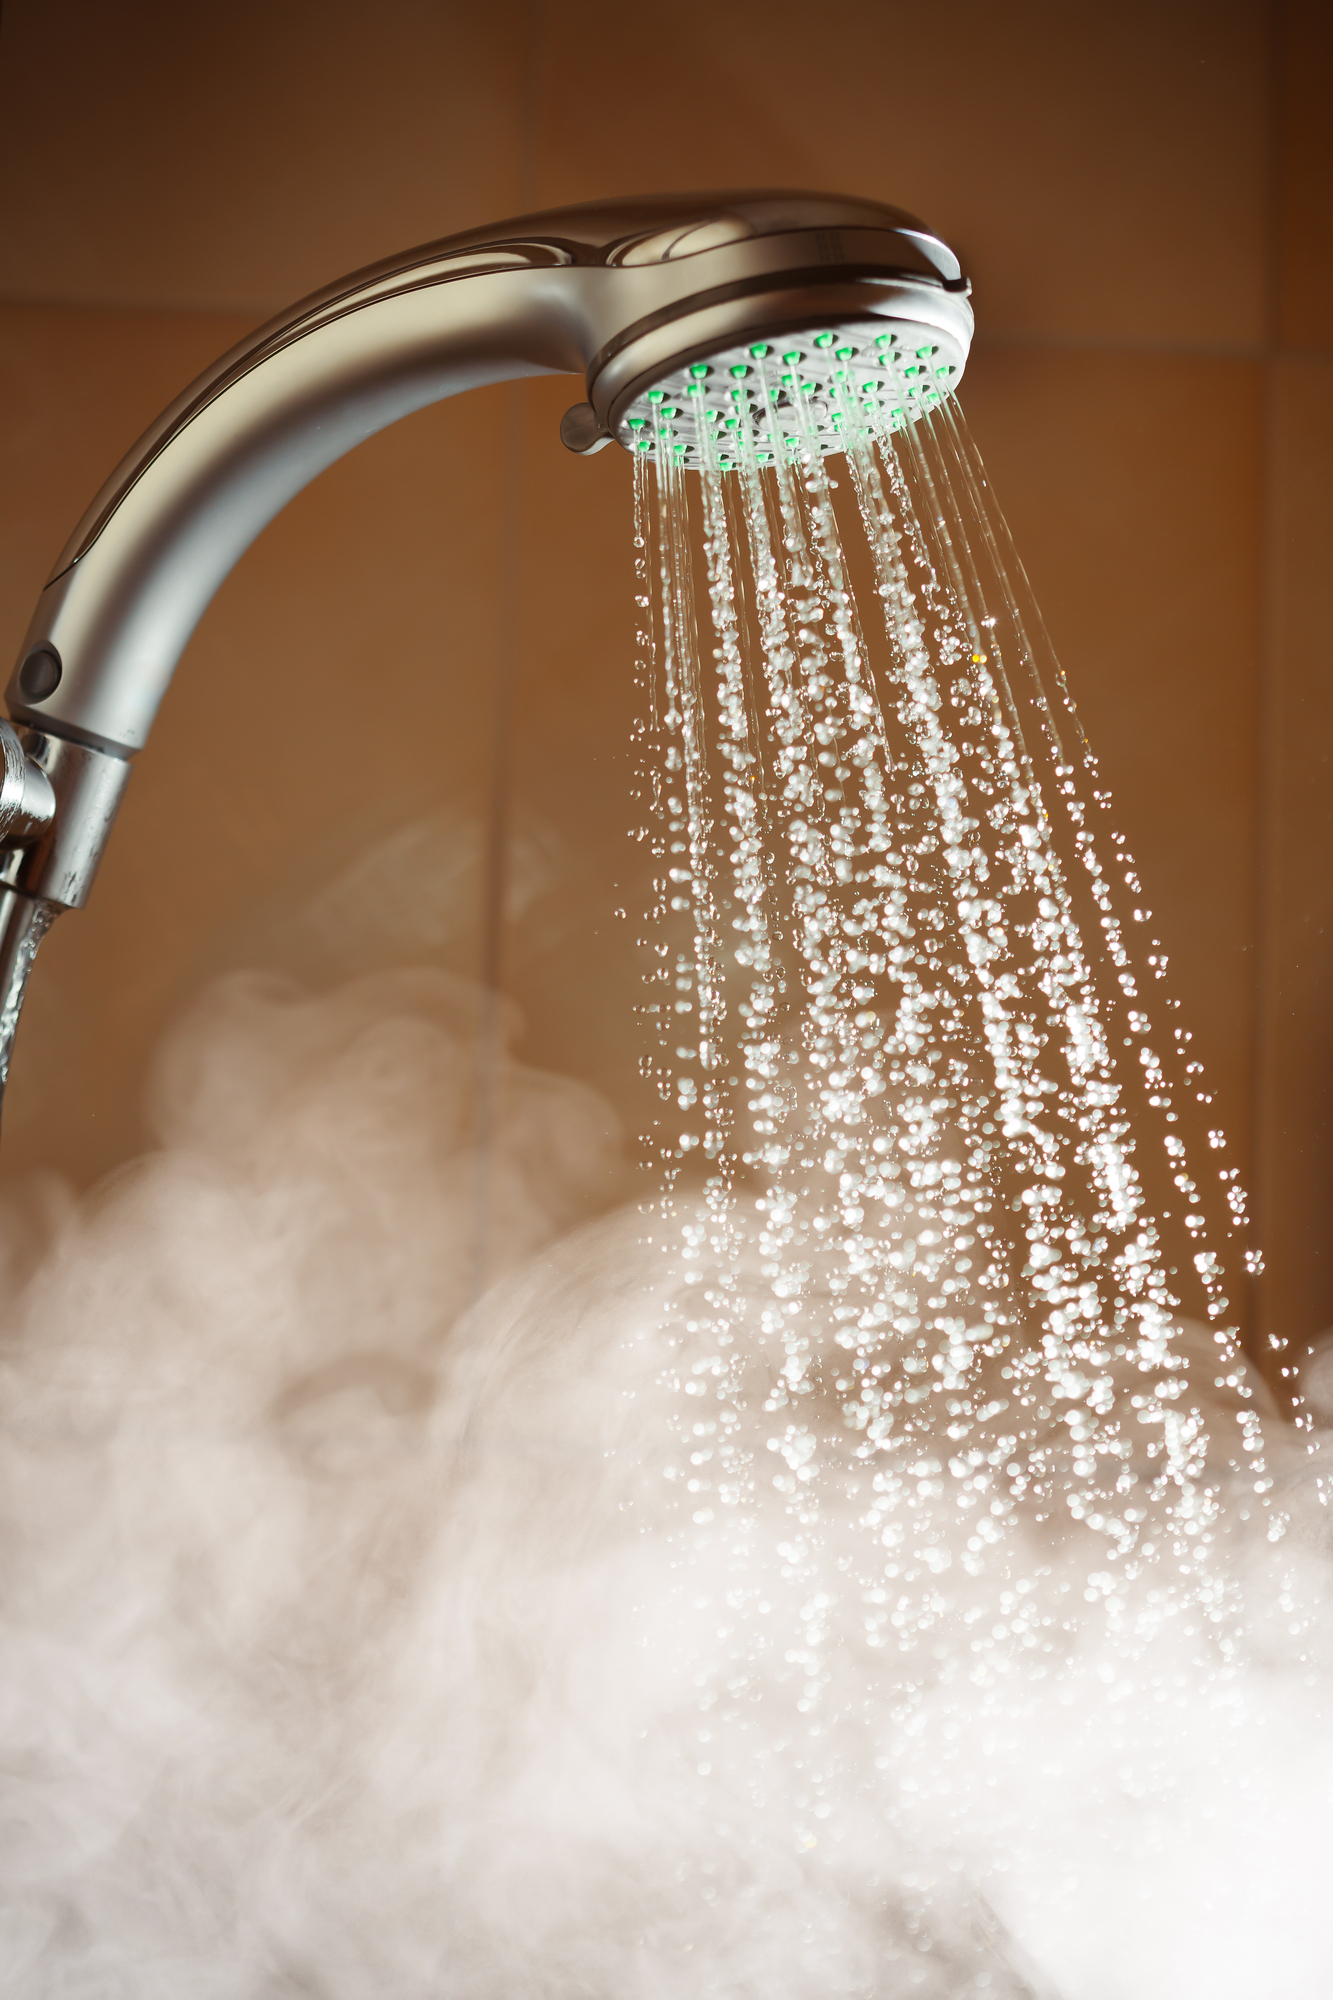 What Are The Benefits Of Shower Steamer